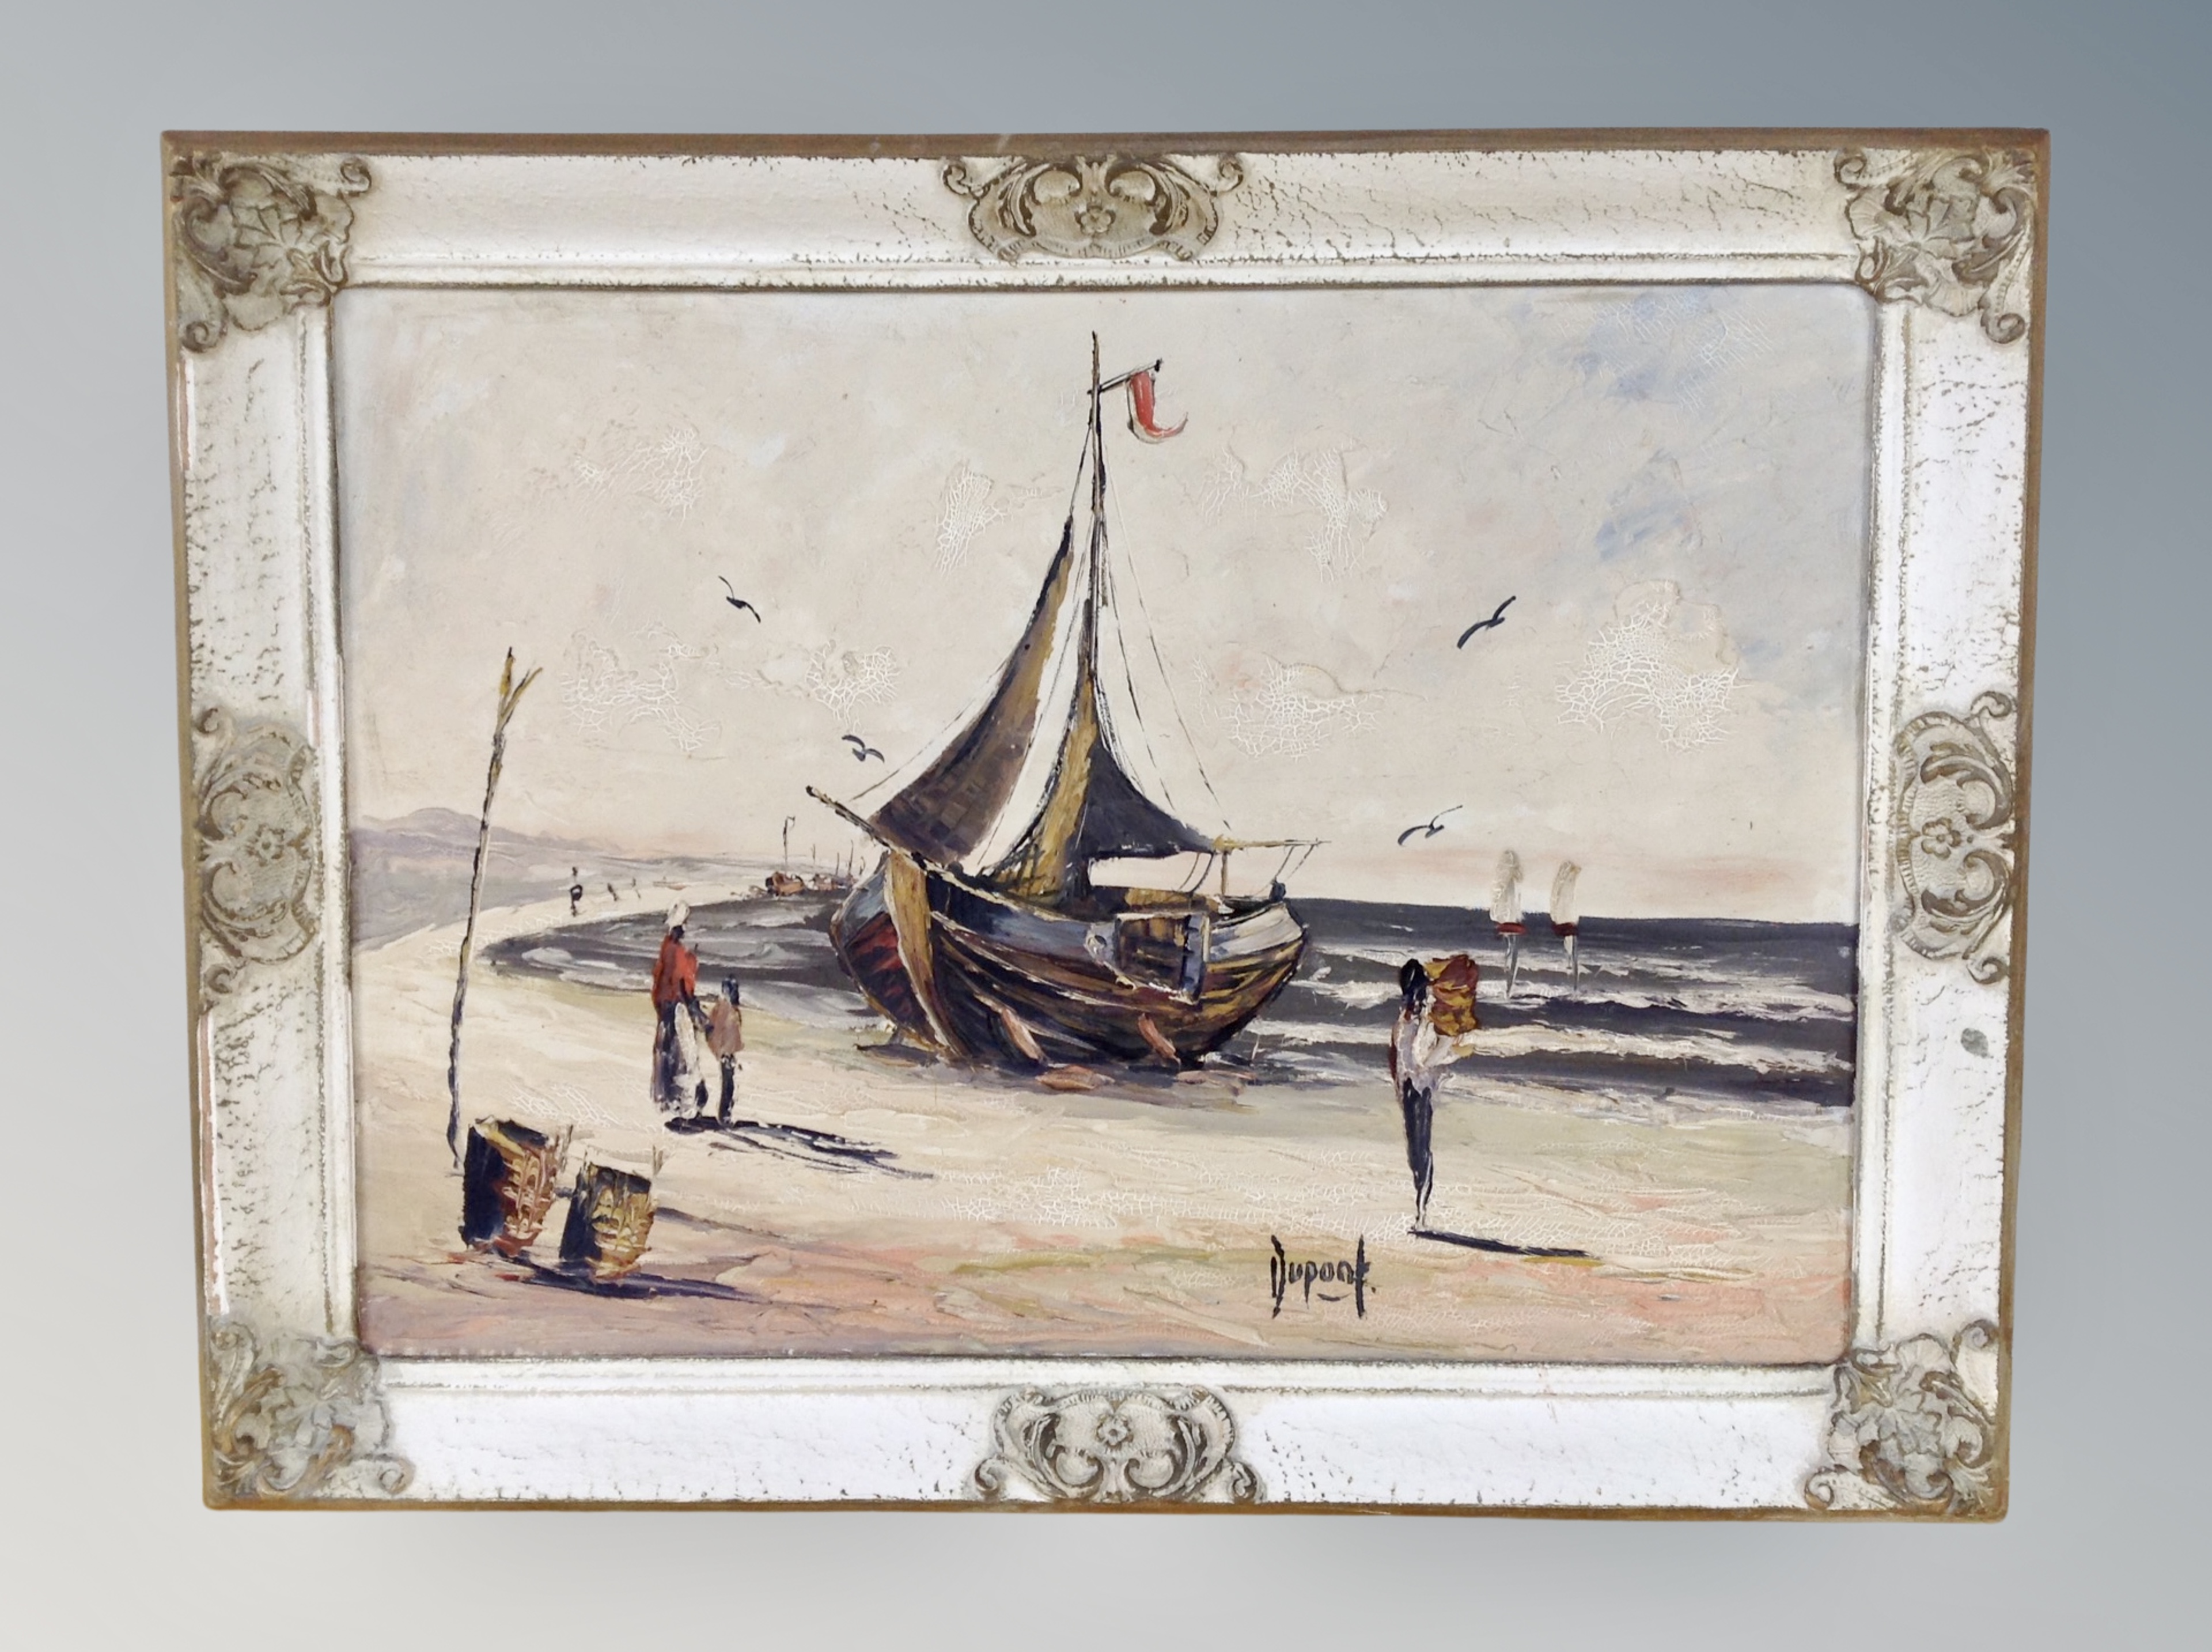 Dupont : Fishing boat moored on a beach, impasto oil on canvas,